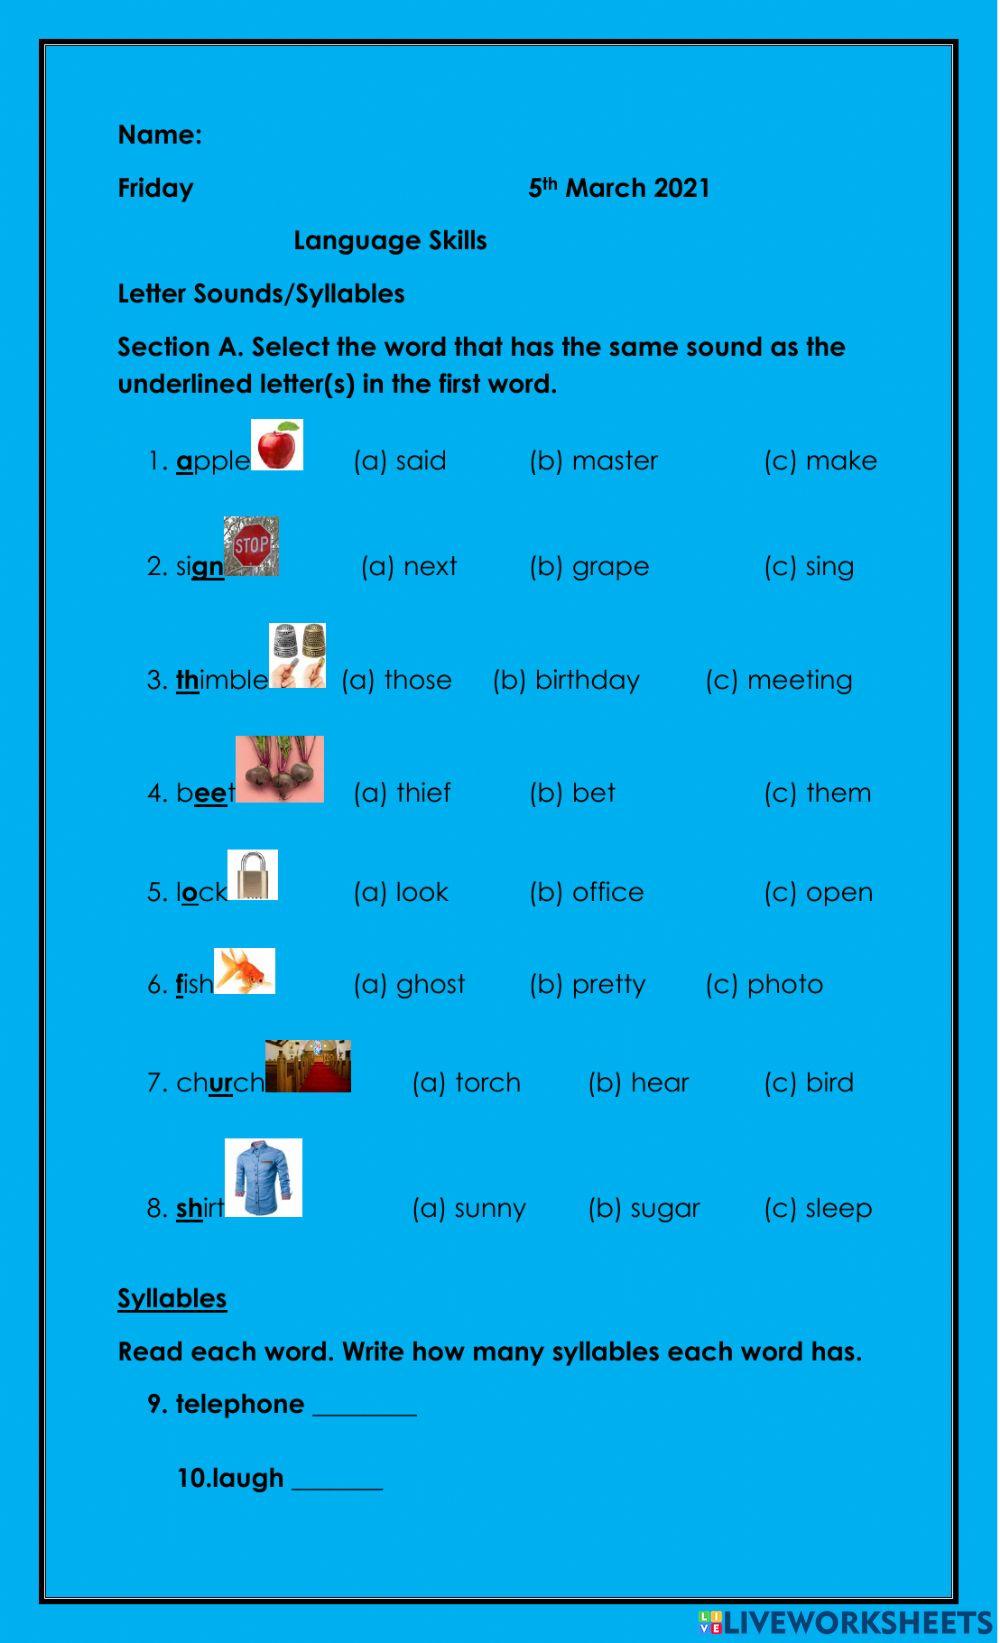 Letter sounds and syllables